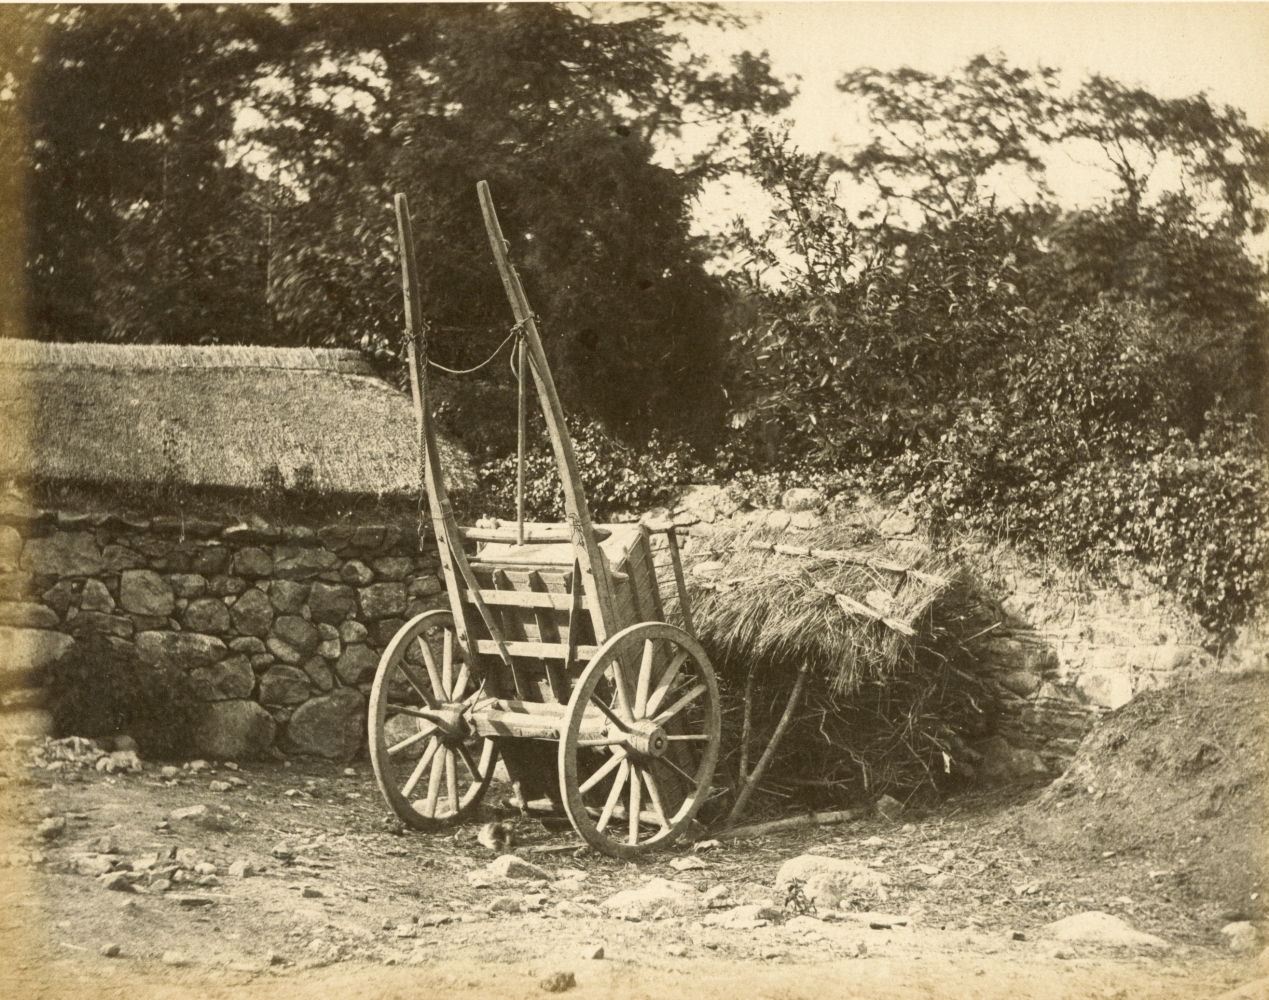 Hugh OWEN (English, 1808-1897) Cart and thatched kindling storehouse Albumen print, 1860s-1870s, from a paper negative, before 1855 17.6 x 22.5 cm mounted on 26.0 x 28.3 cm album sheet Numbered "36" in pencil on mount